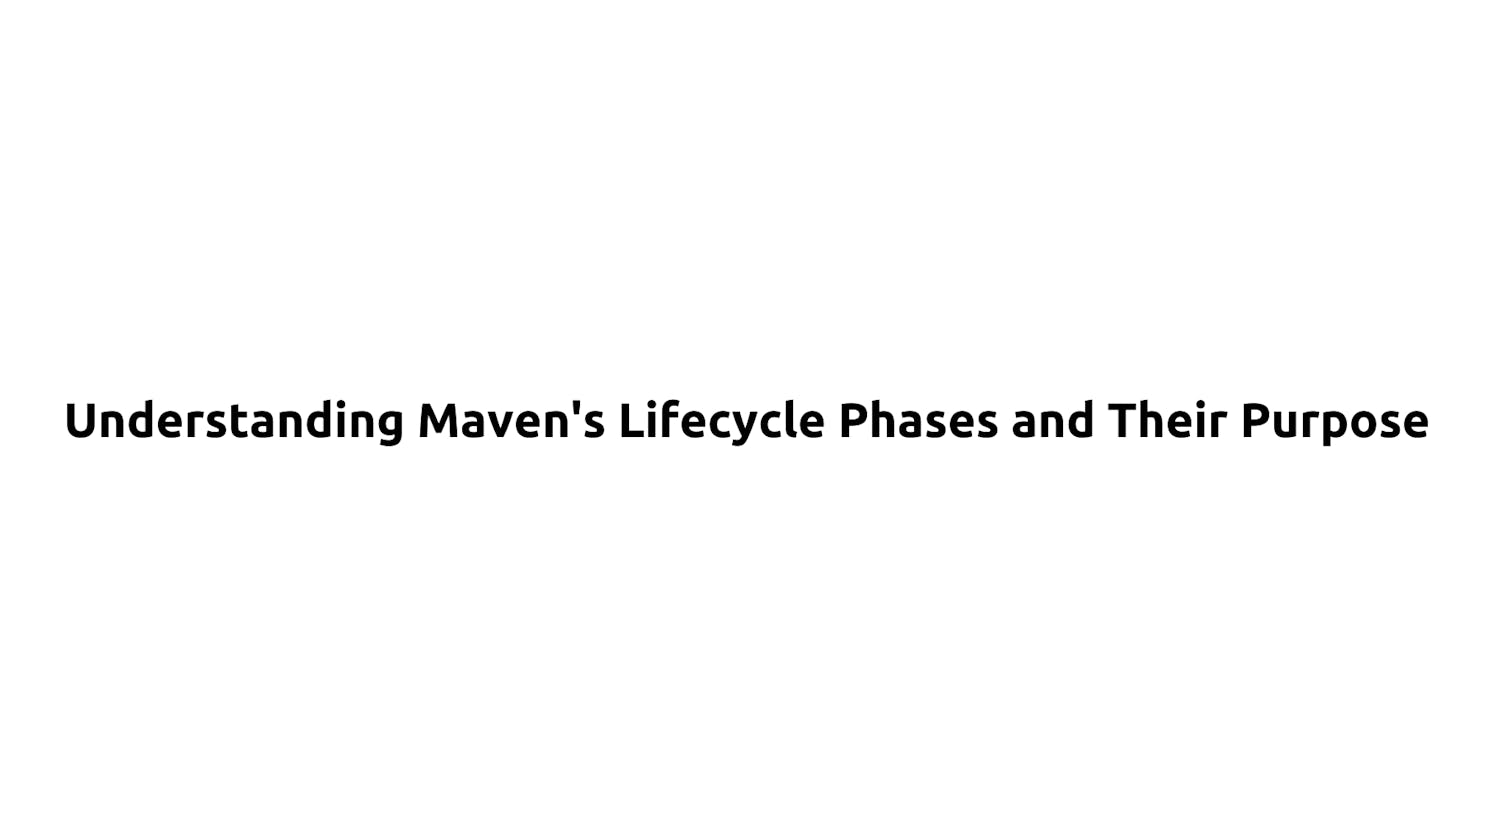 Understanding Maven's Lifecycle Phases and Their Purpose